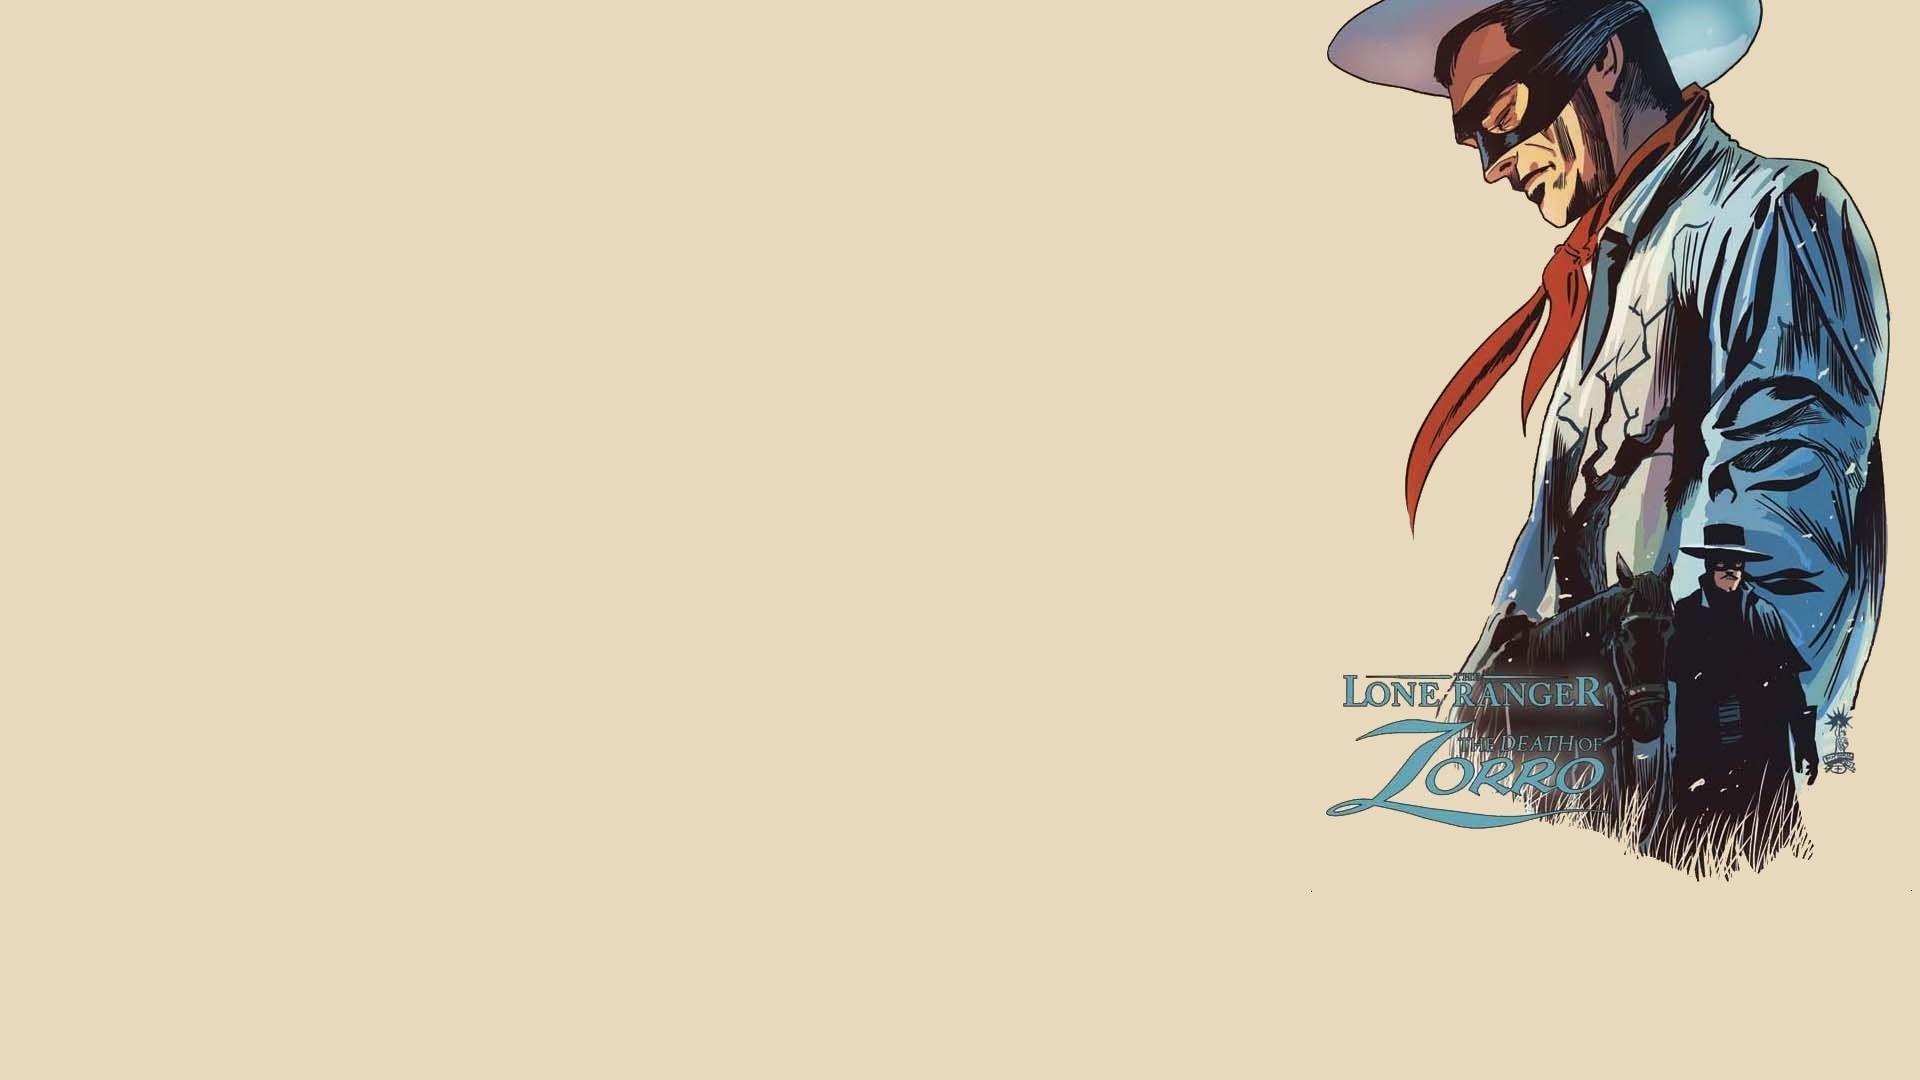 The Lone Ranger: The Death Of Zorro HD Wallpaper. Background Image